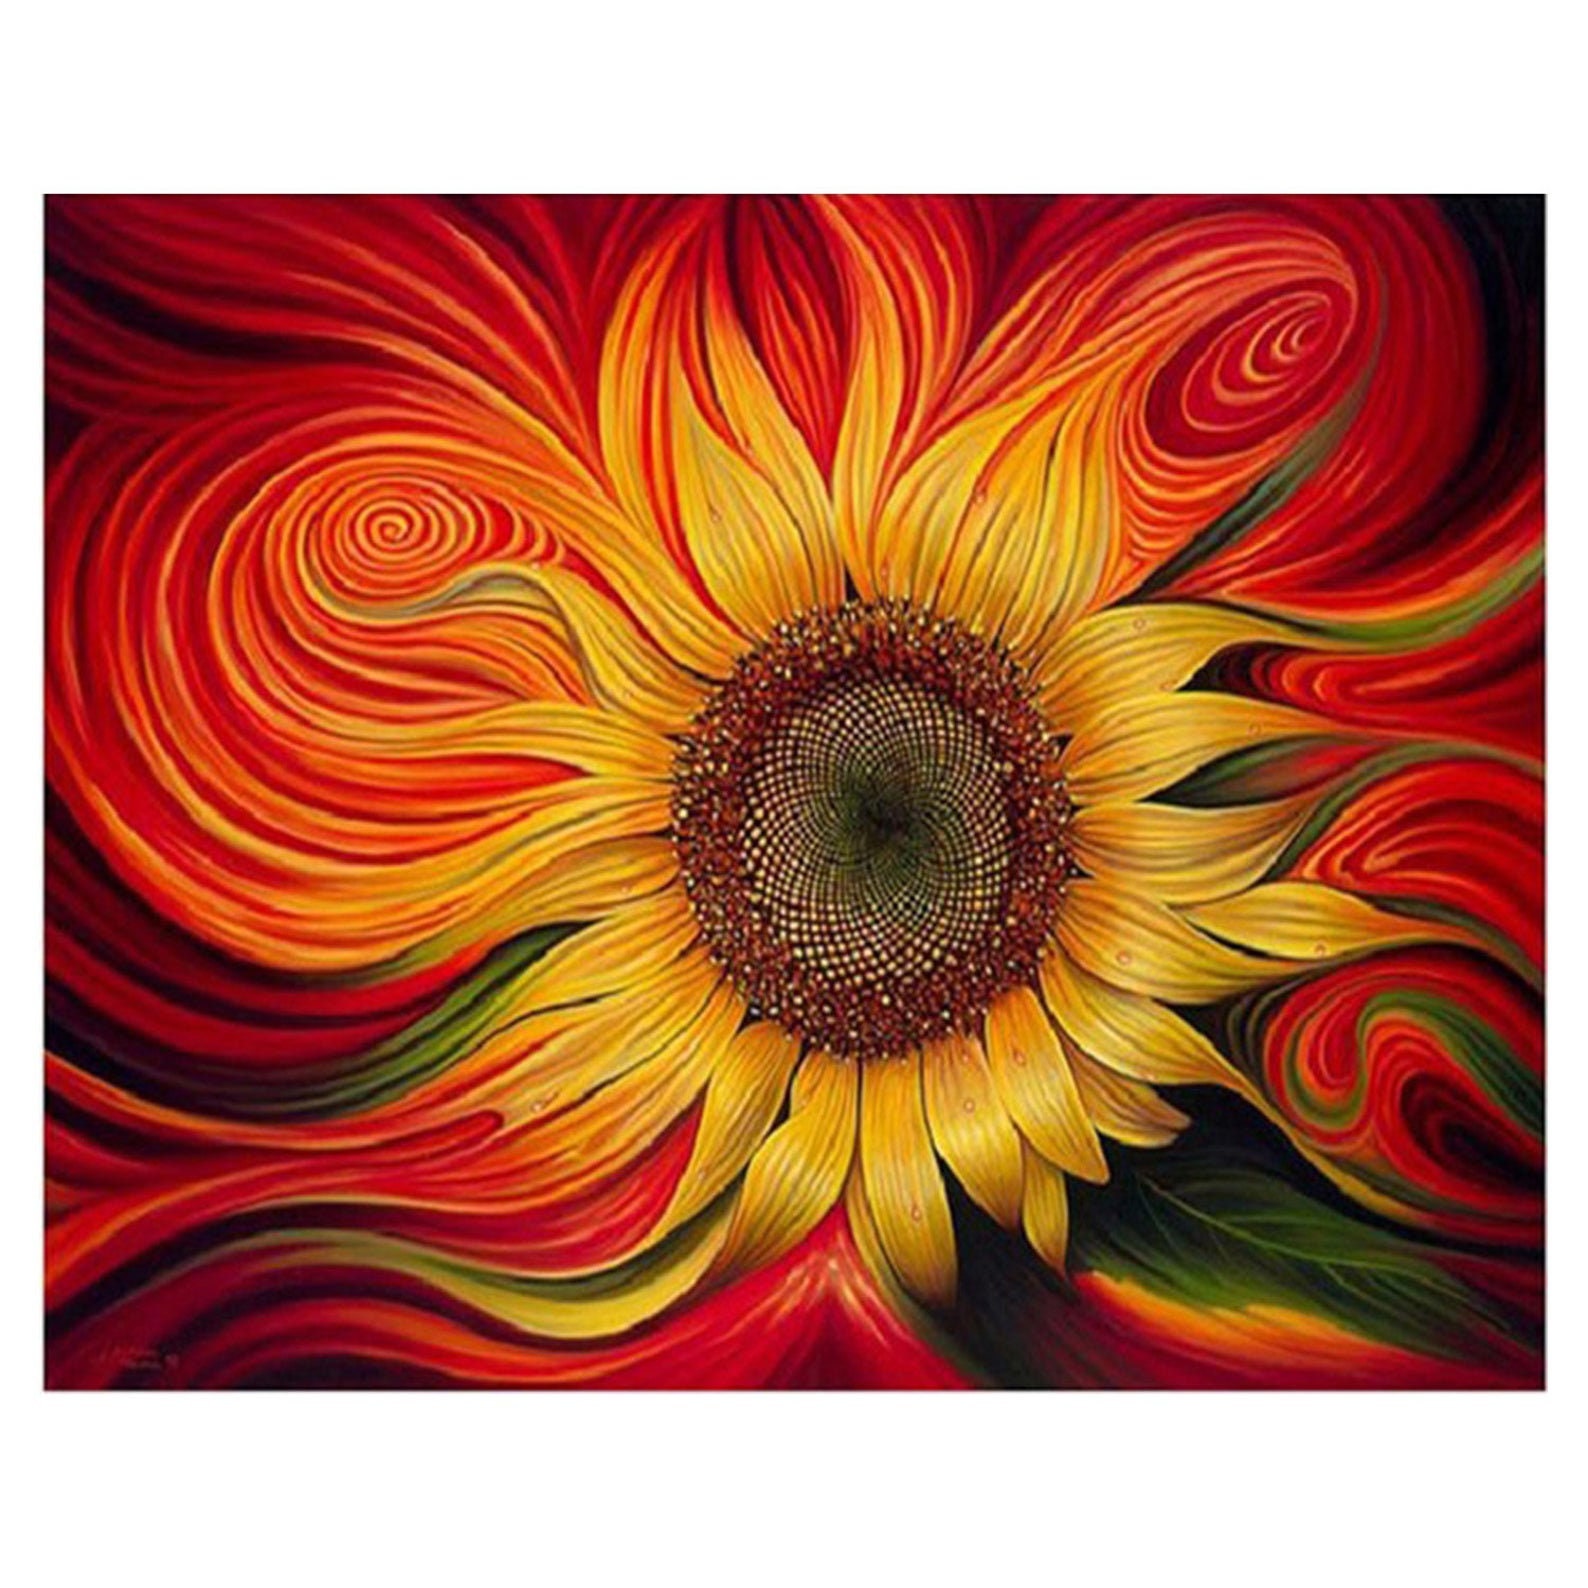 1pc 7.87x7.87inch 5D DIY Diamond Painting For Adults And Beginners Beach  Sunflower Diamond Painting For Living Room Bedroom Decoration